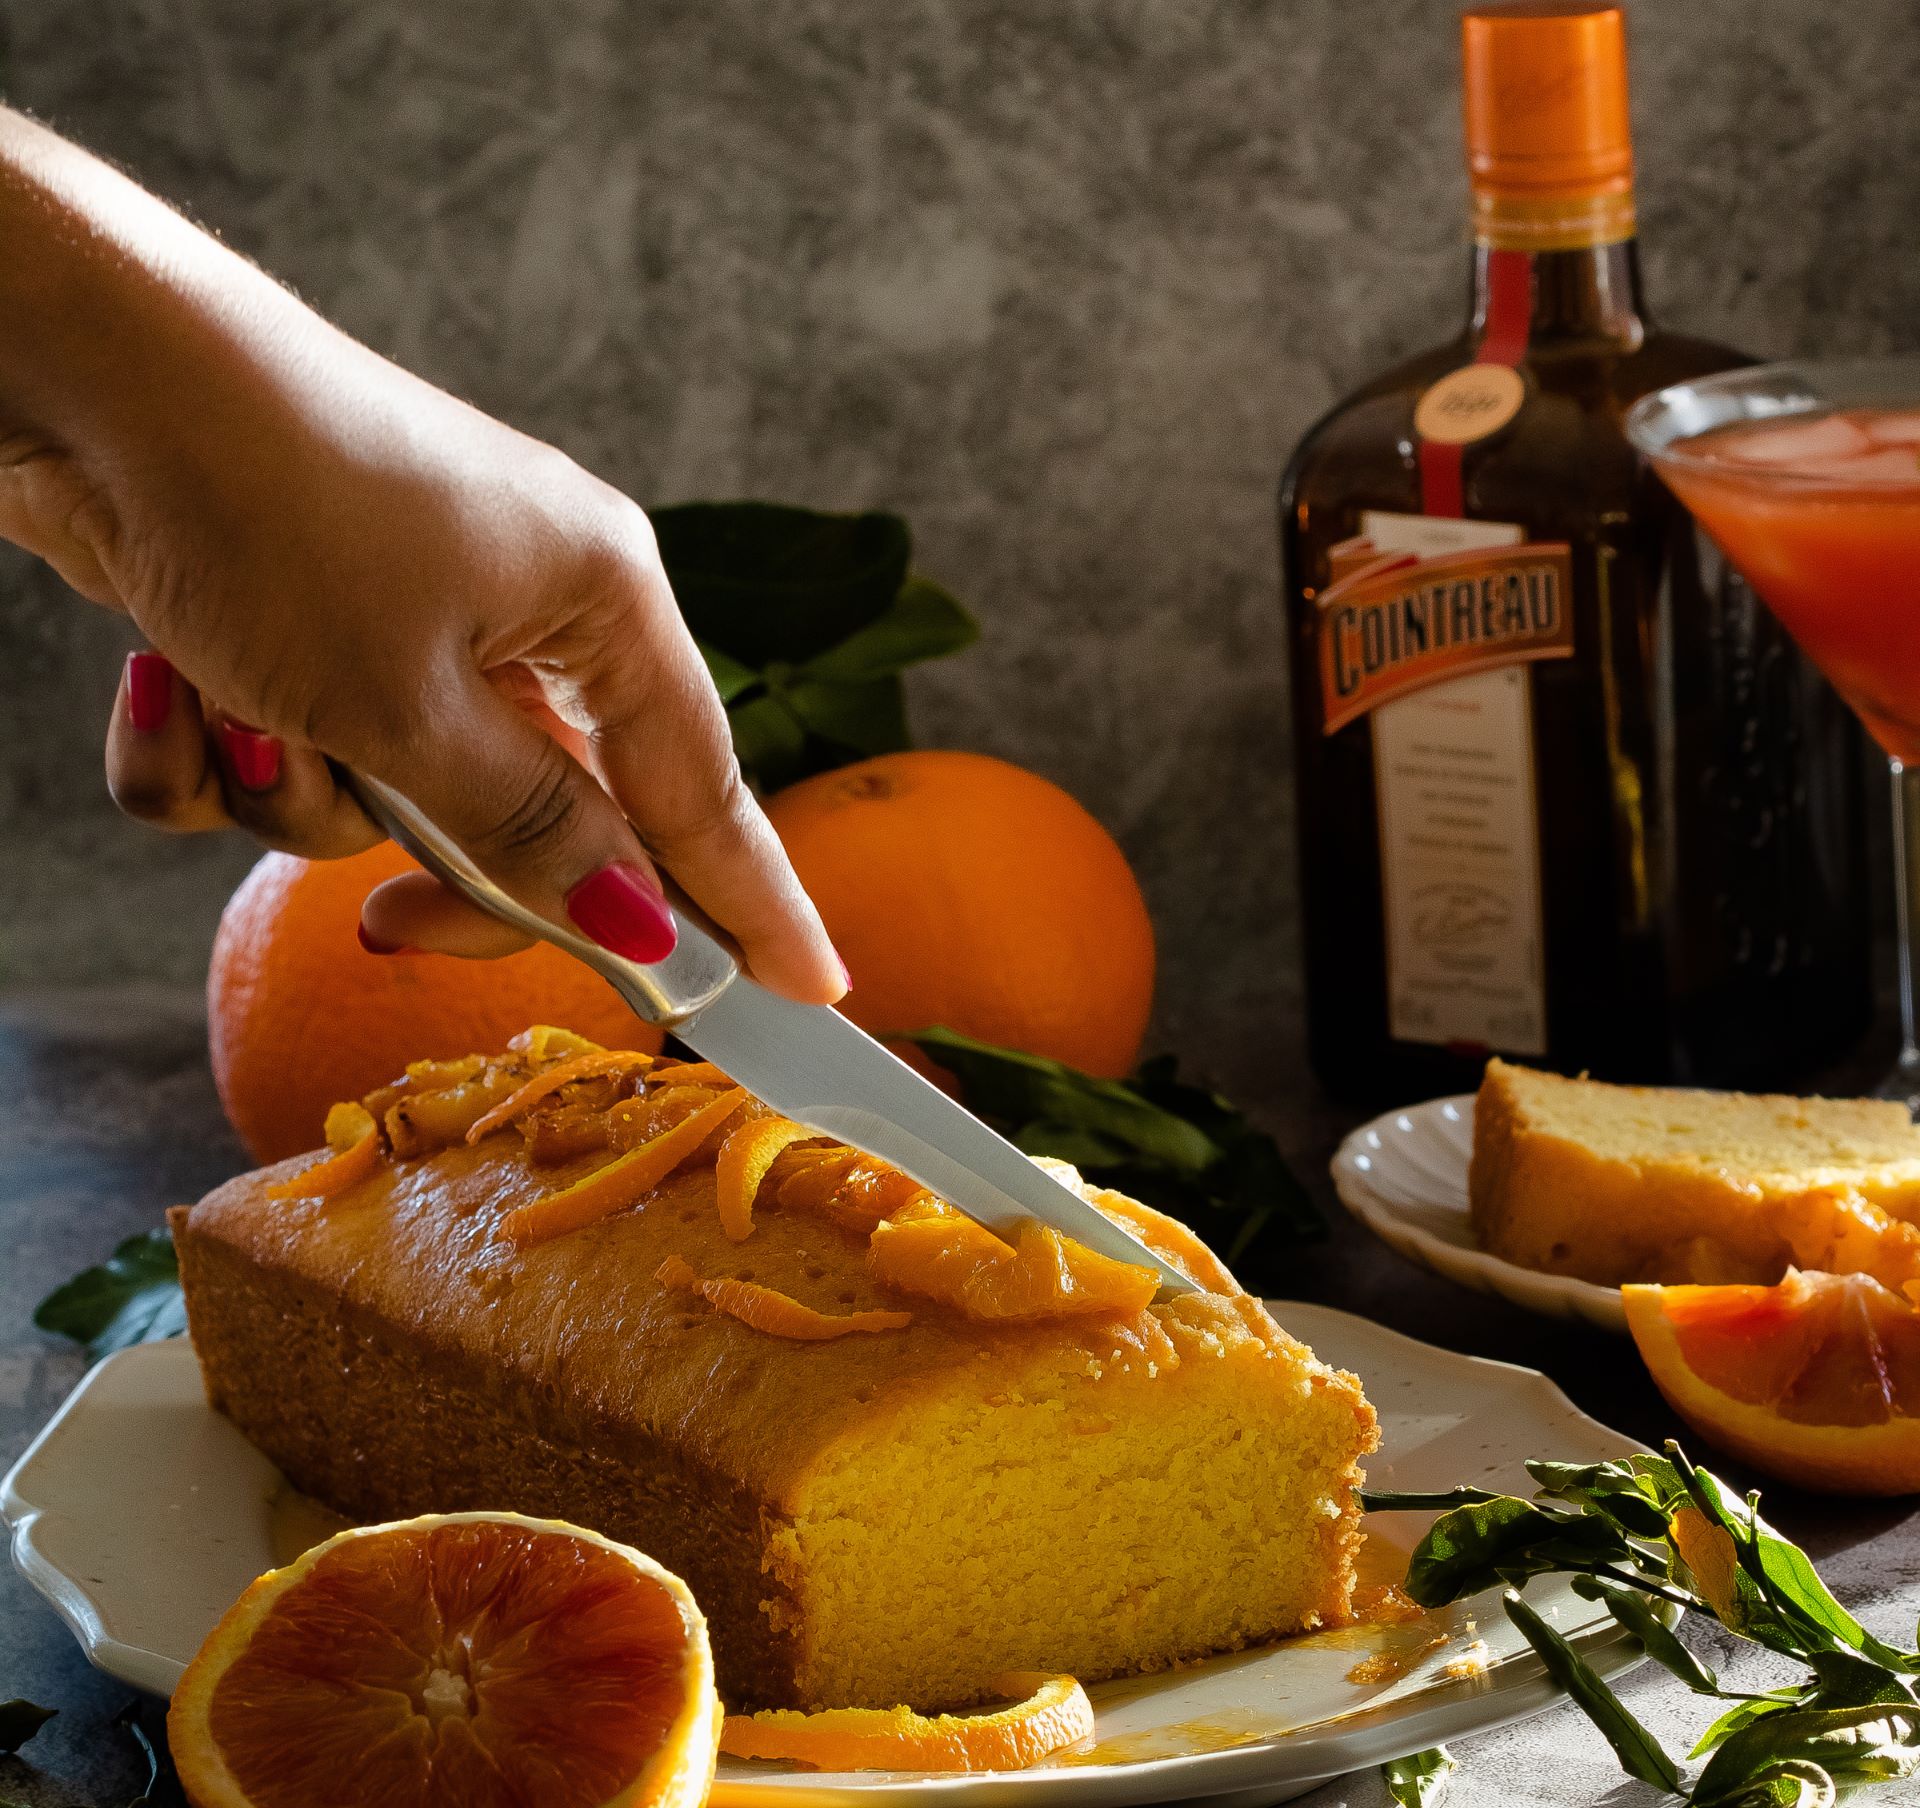 Orange Cake flavored with Cointreau and topped with orange segments